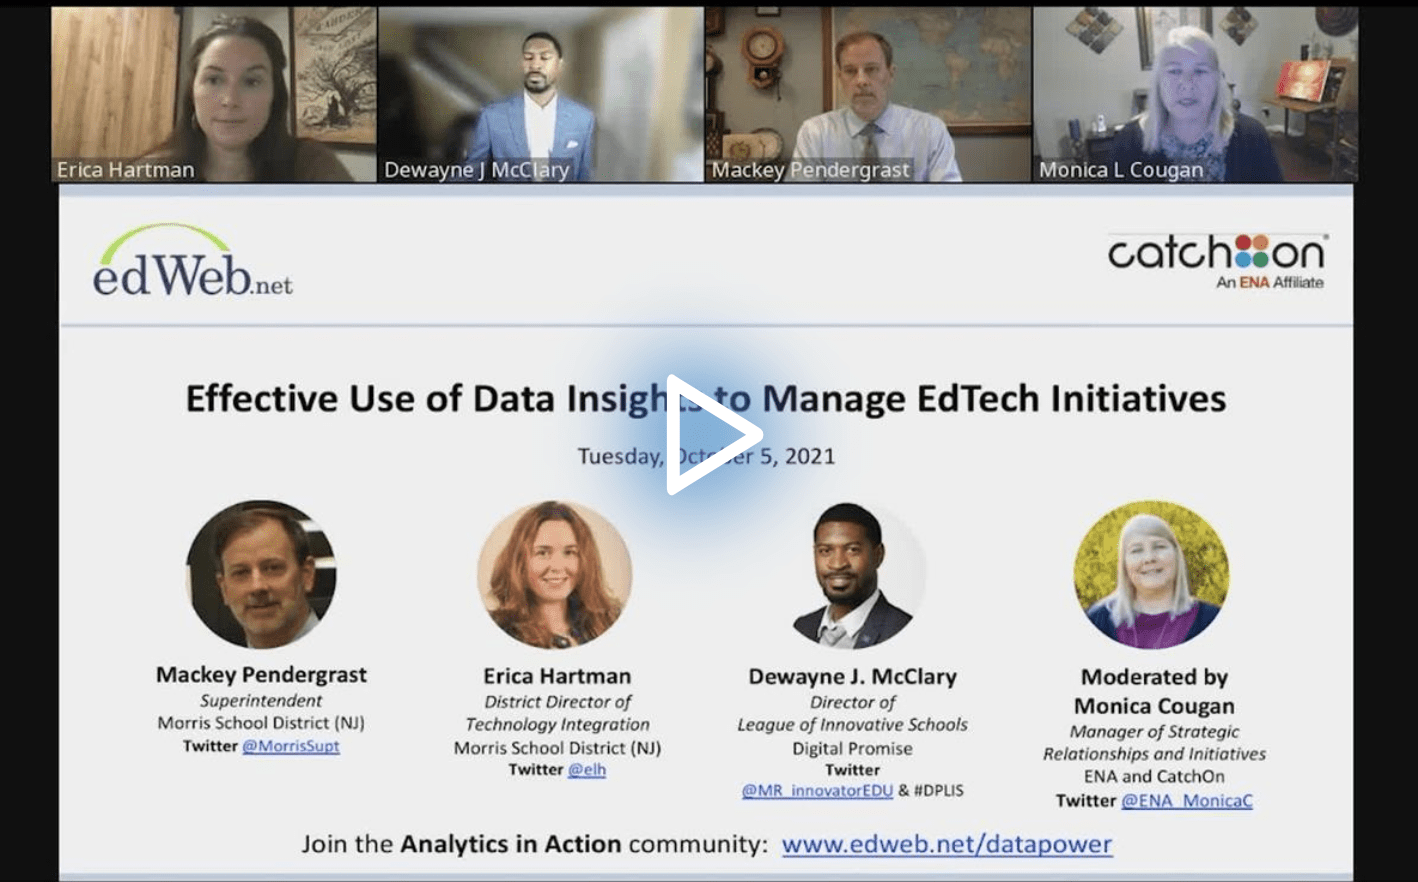 Effective Use of Data Insights to Manage EdTech Initiatives edLeader Panel recording link